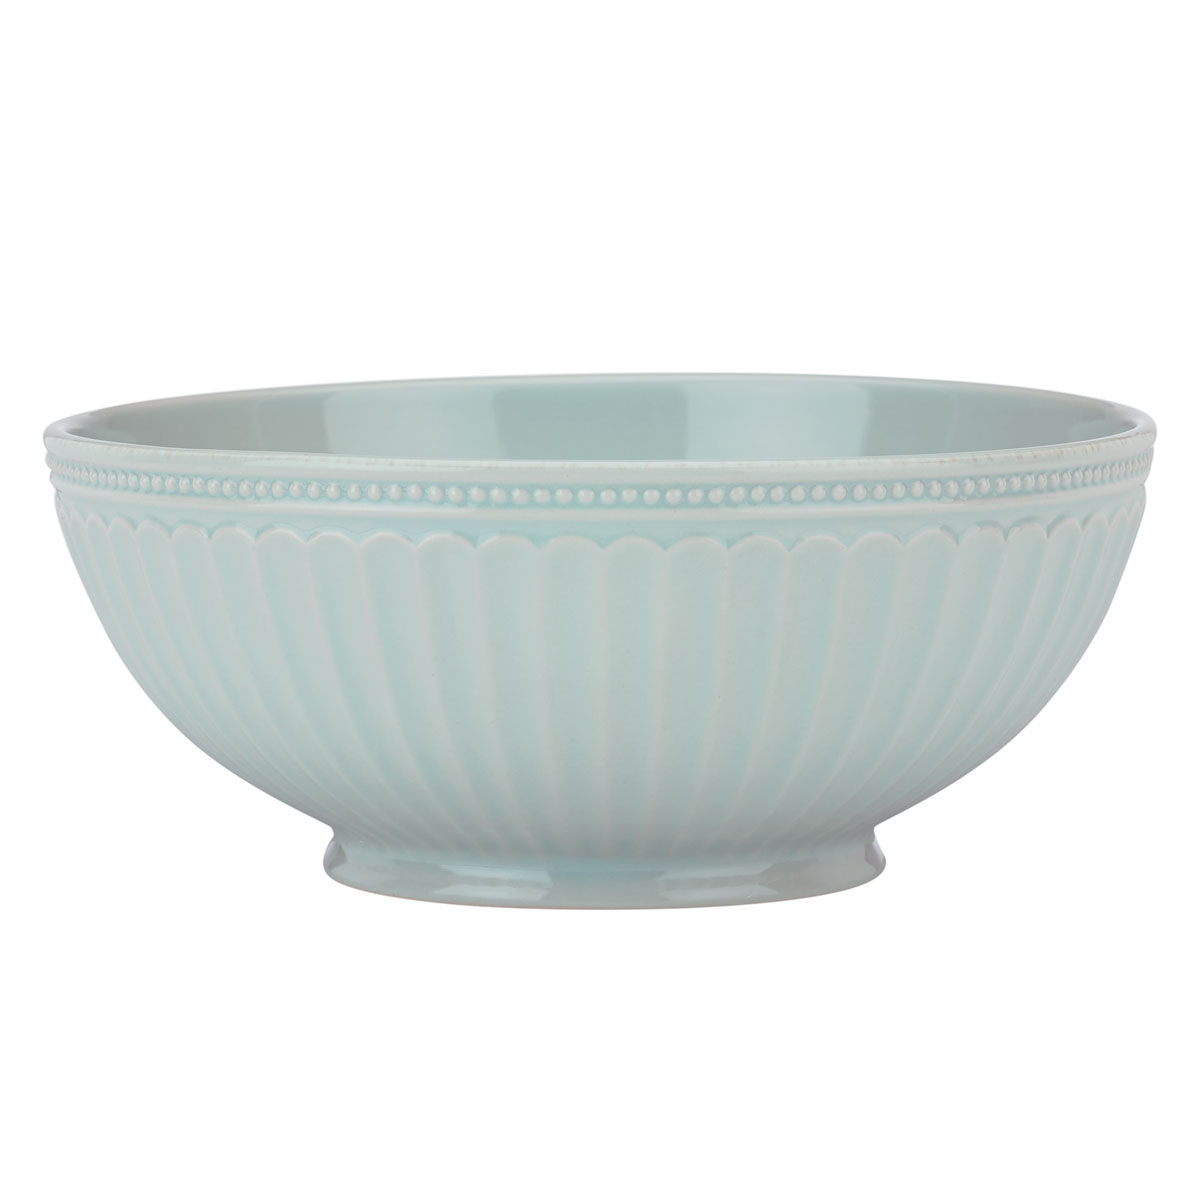 Lenox French Perle Groove Ice Blue China Serving Bowl